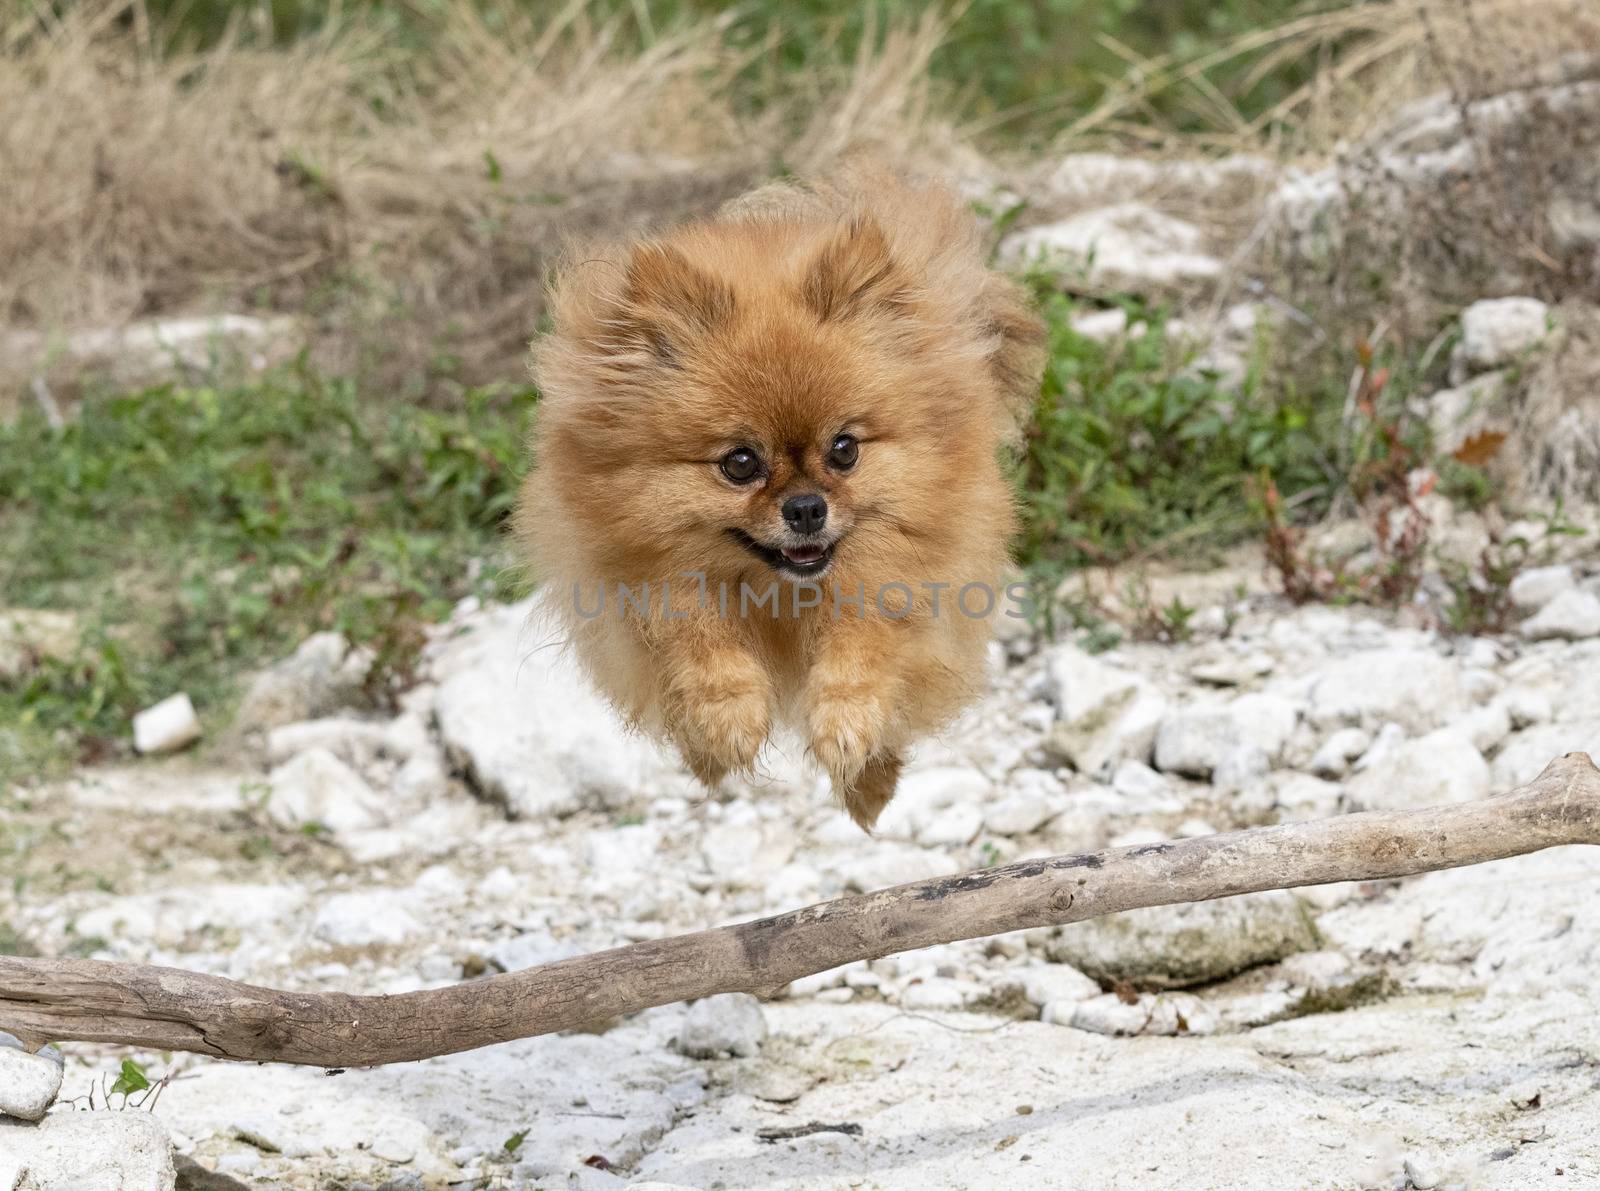 pomeranian in nature by cynoclub